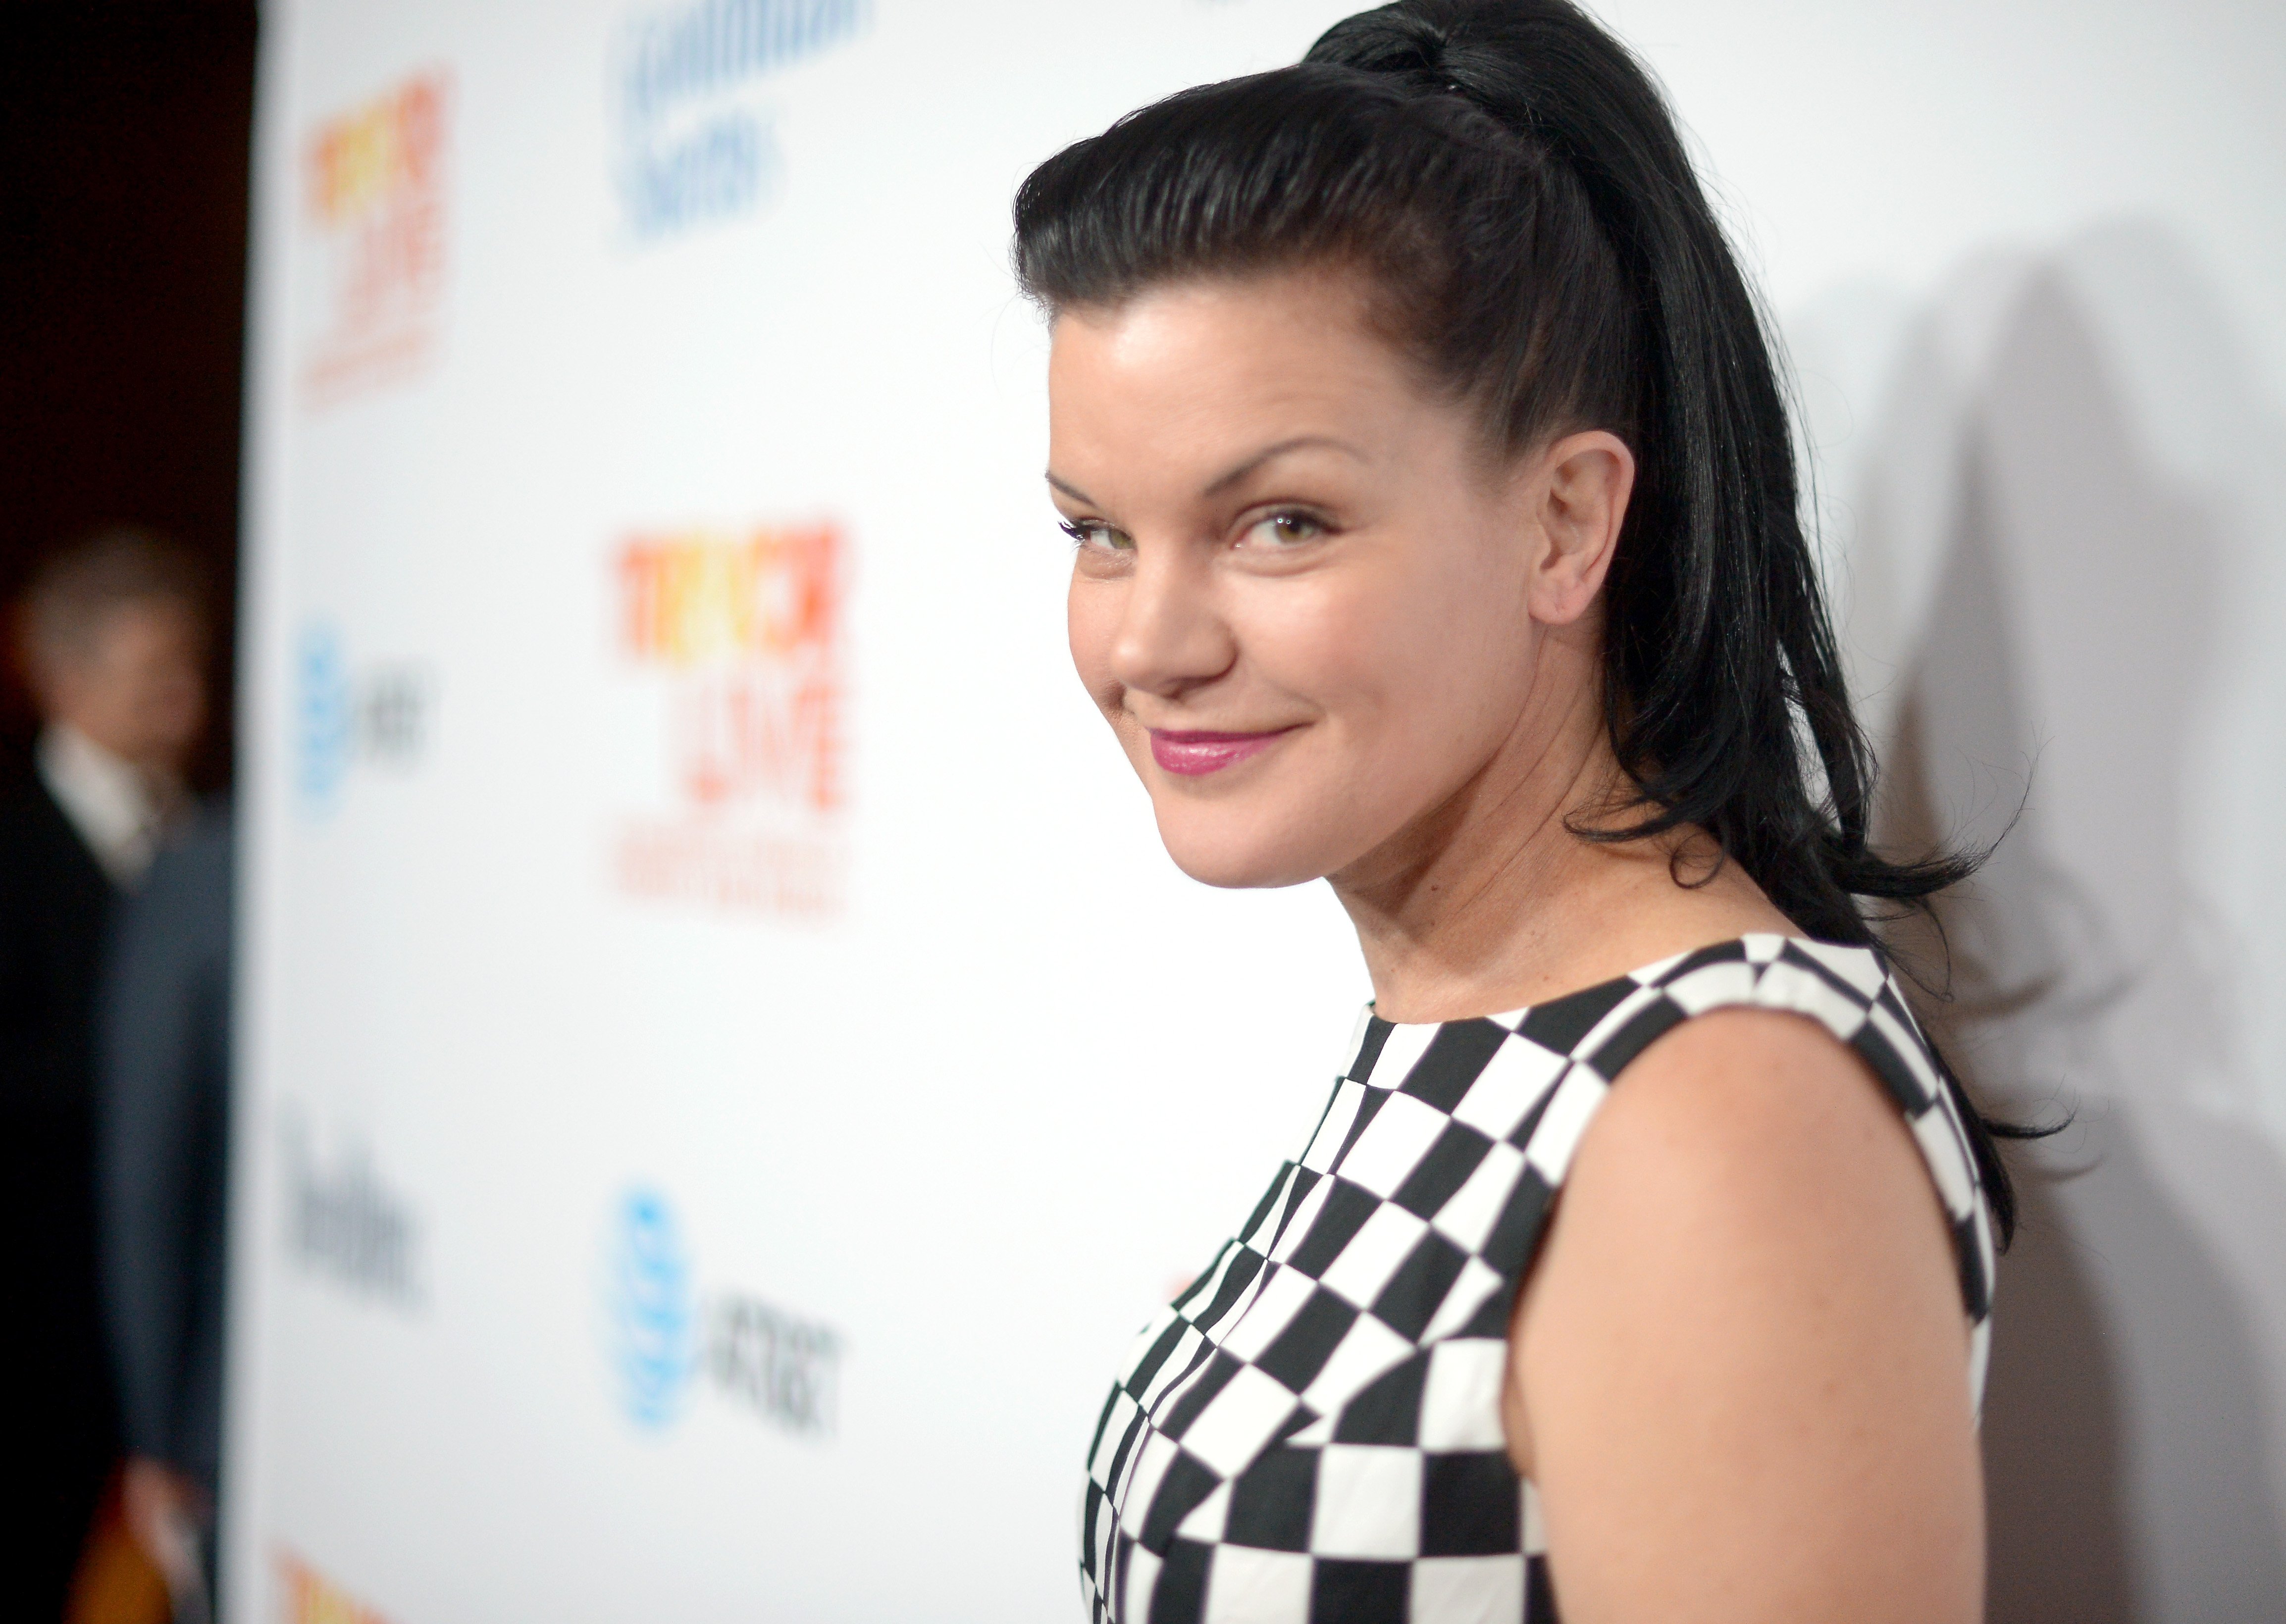 Pauley Perrette attending The Trevor Project's 2016 TrevorLIVE LA, 2016, Beverly Hills, California. | Photo: Getty Images